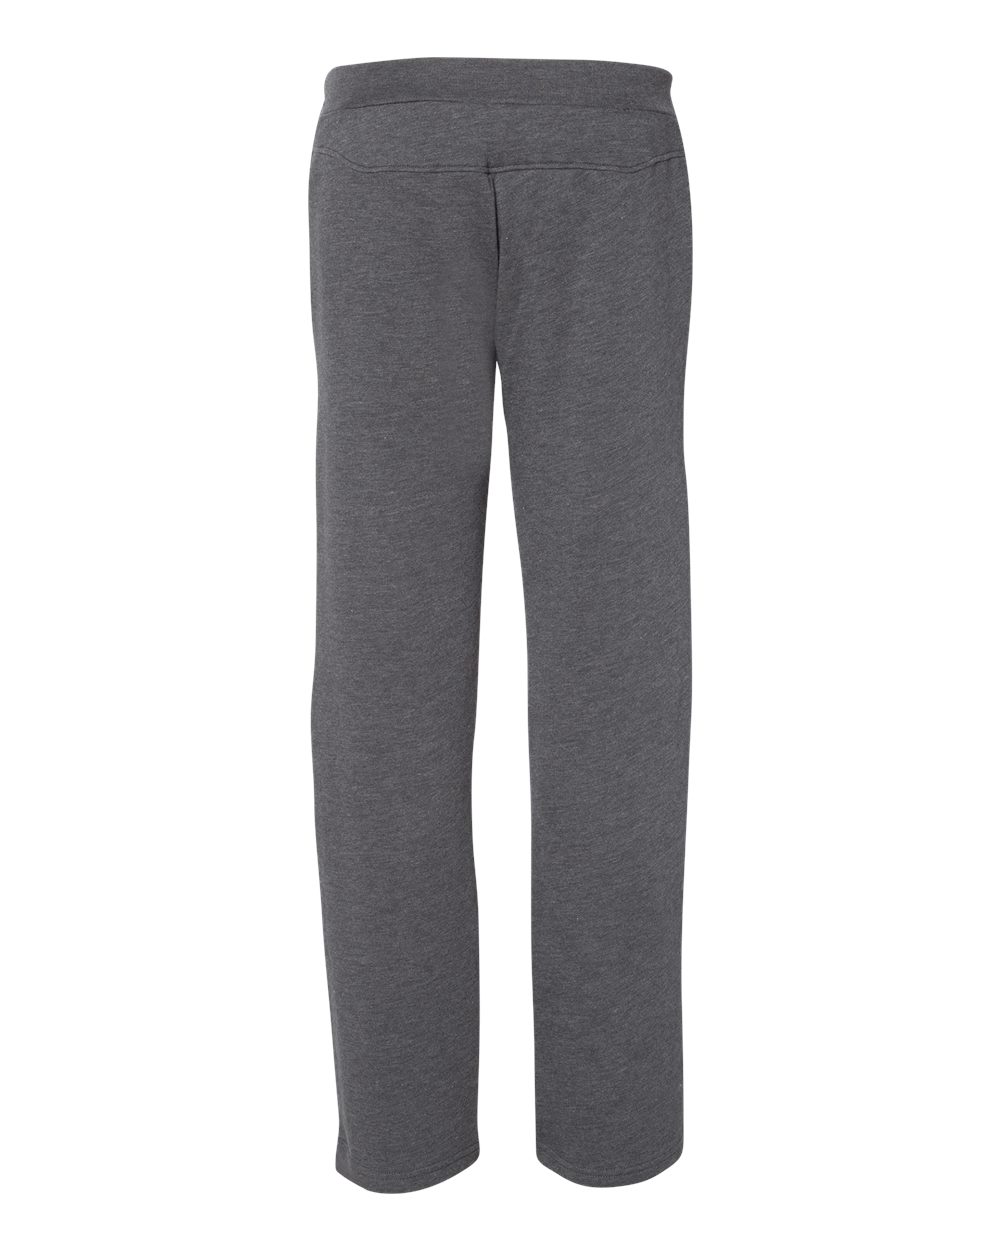 Russell Athletic B61311513 Womens Lightweight Open Bottom Sweatpants&#44; Black Heather - Small - image 3 of 5